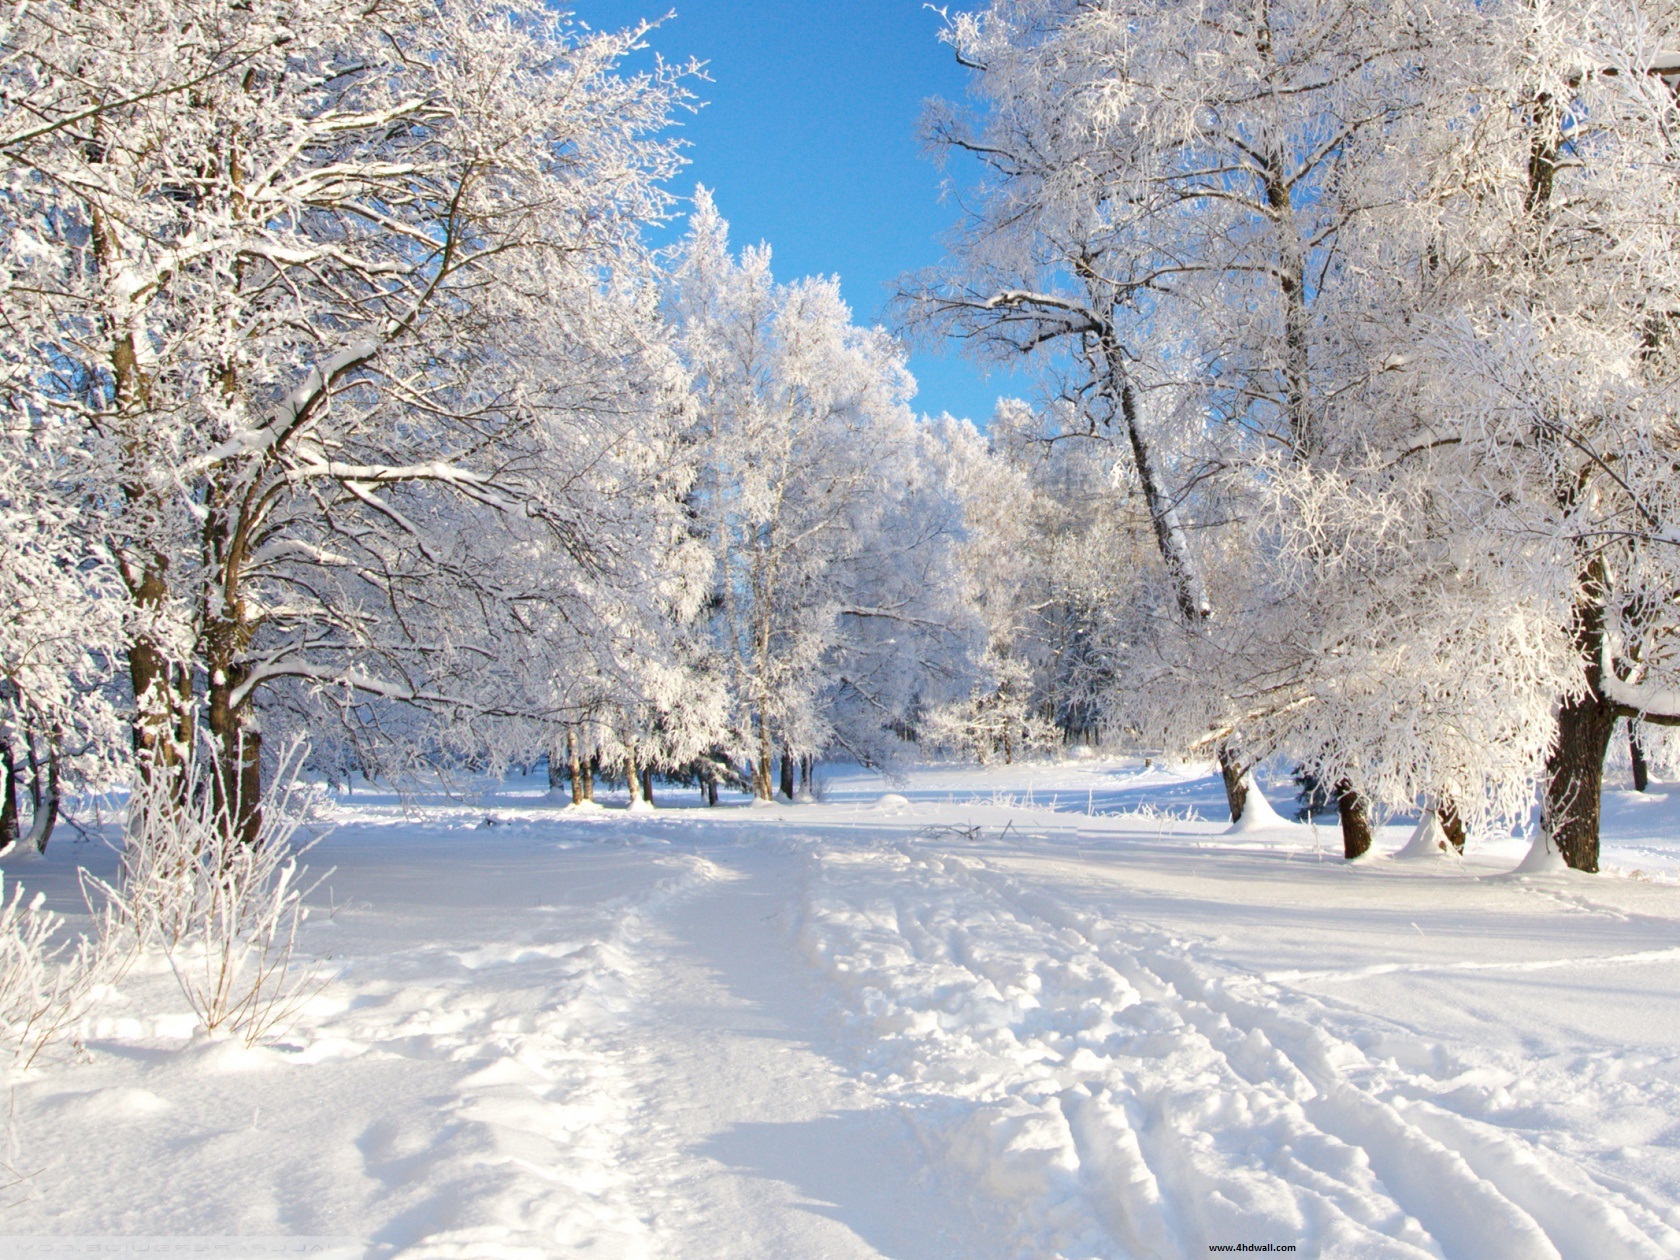 real way snow, winter background images free download